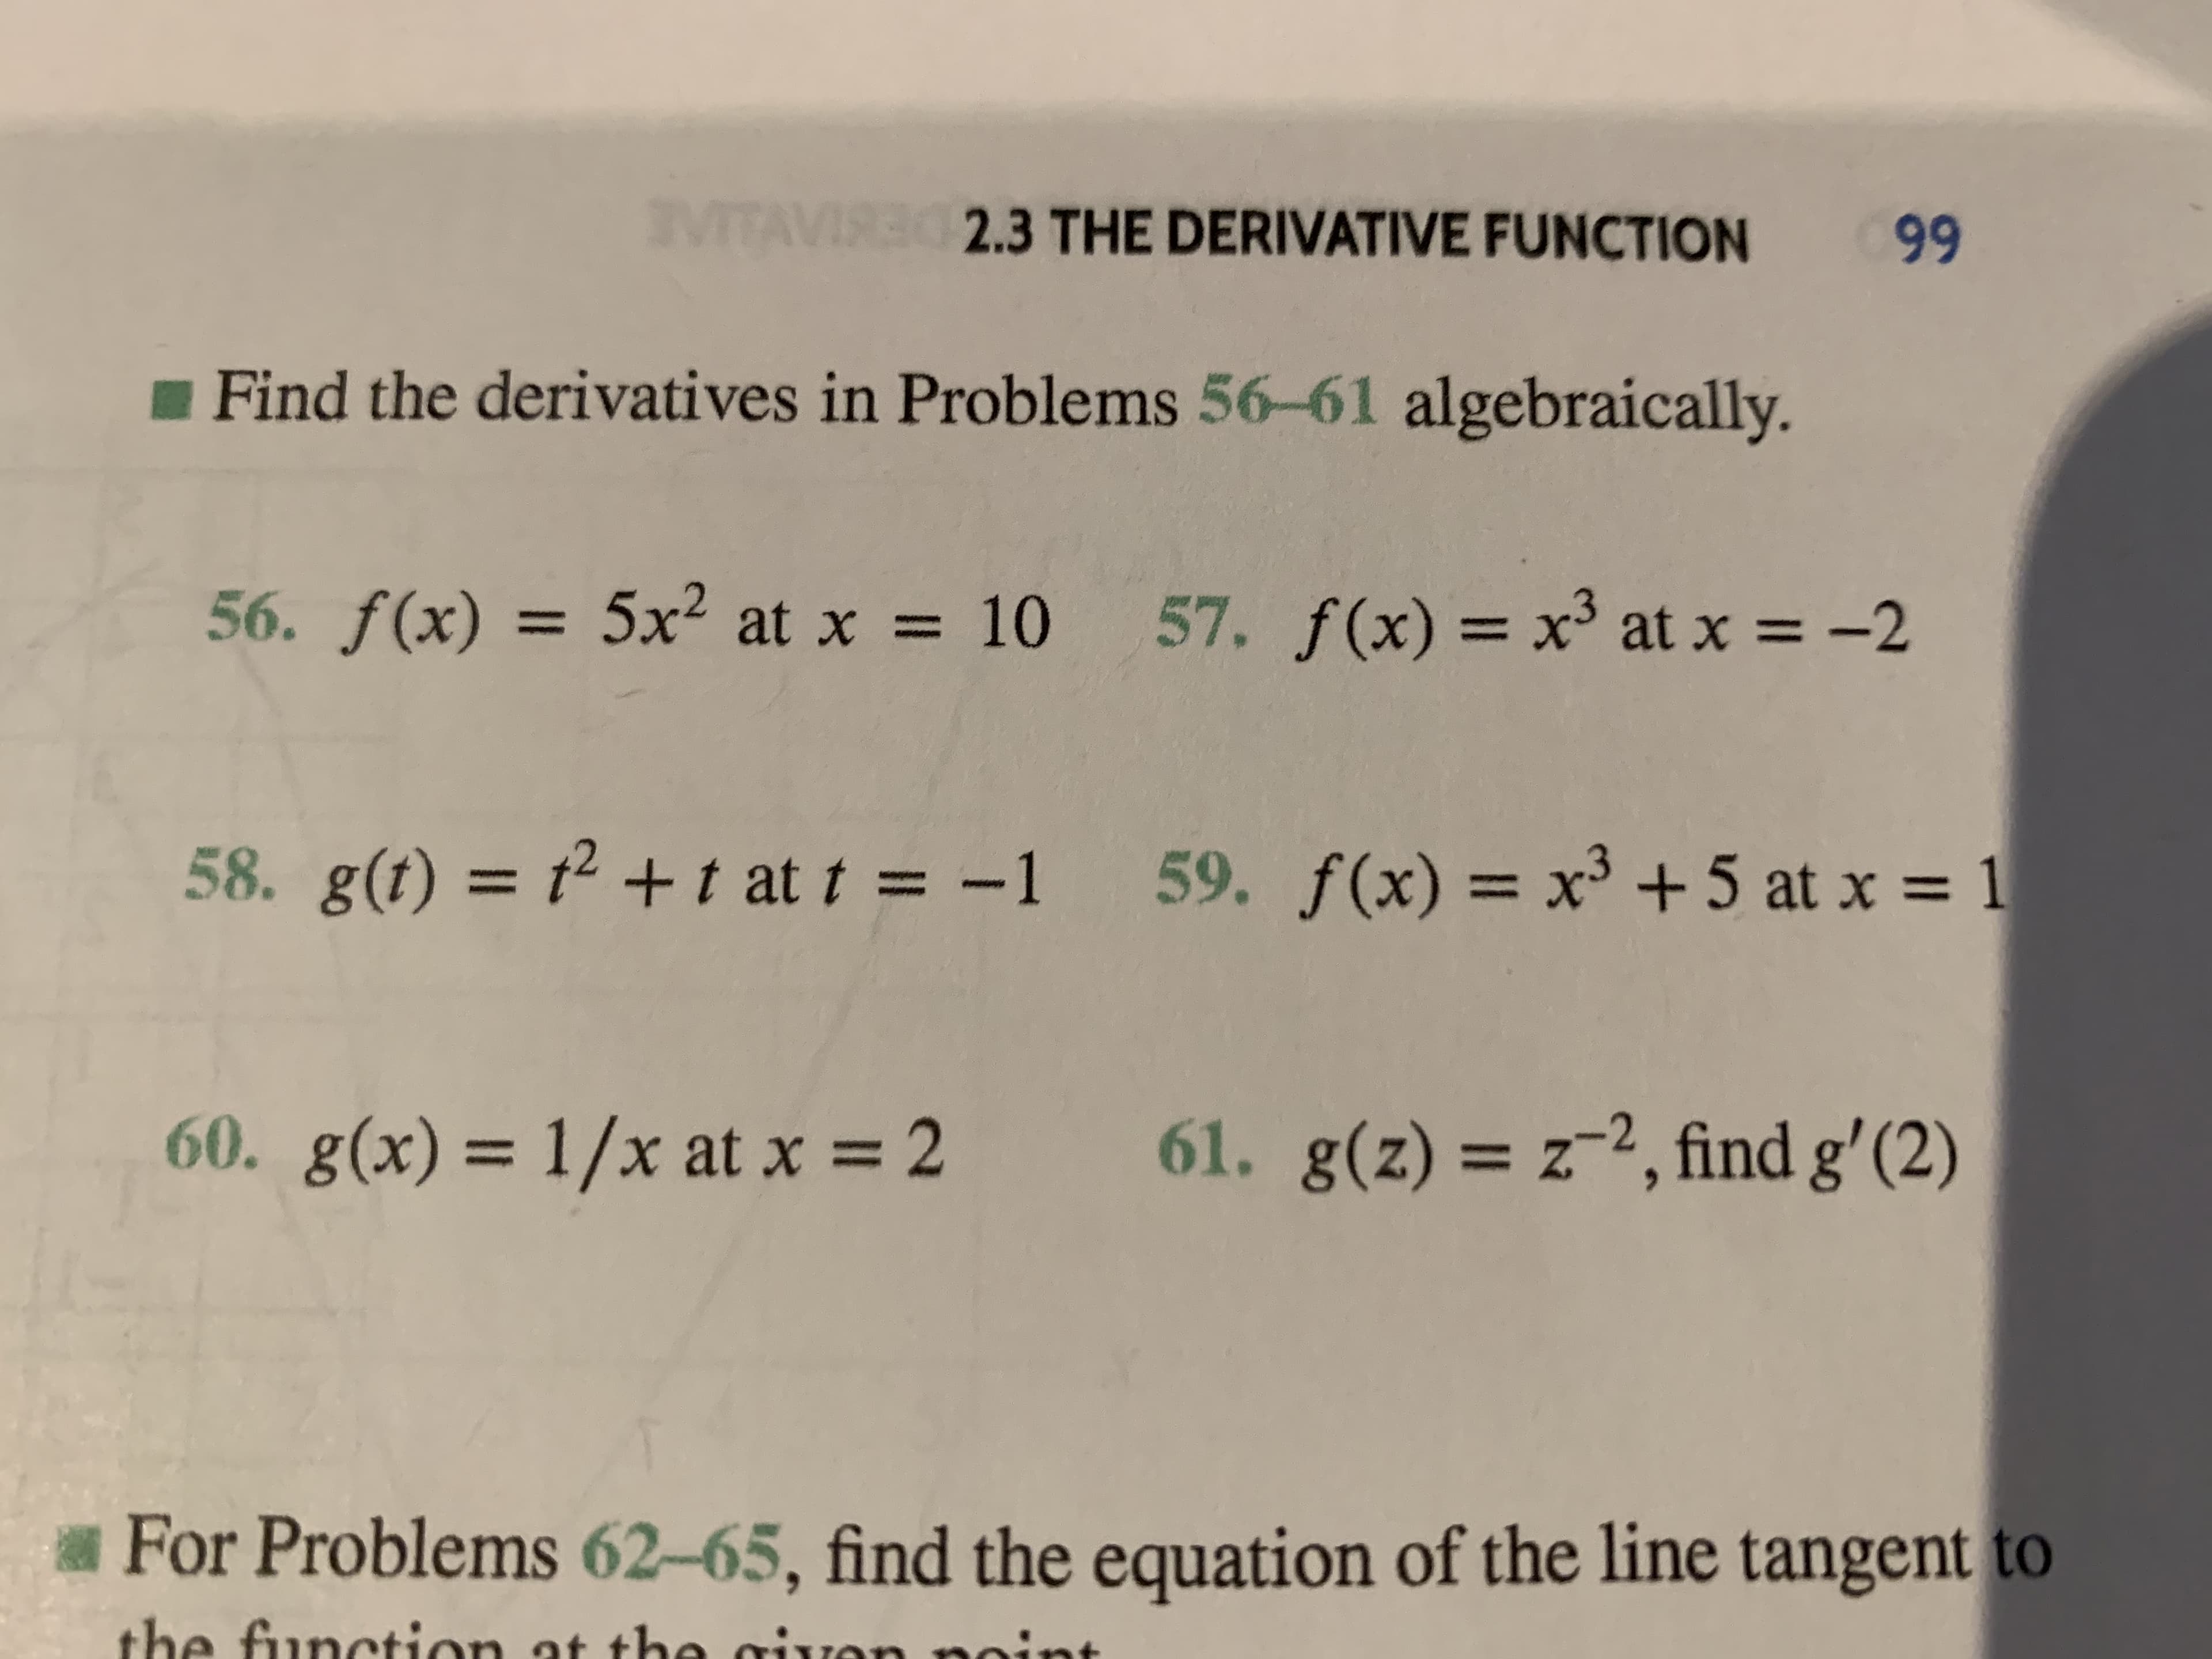 VITAVIRE S3 THE DERIVATIVE FUNCTION
99
Find the derivatives in Problems 56-61 algebraically.
56. f(x) = 5x2 at x
57. f(x) = x3 at x
10
-2
58. g(t) = 2 t at t = -1
59. f(x) x3 +5 at x
1
61. g(z) z2, find g' (2)
60. g(x)=
1/x at x=2
Z
For Problems 62-65, find the equation of the line tangent to
the function at the givon
nin
